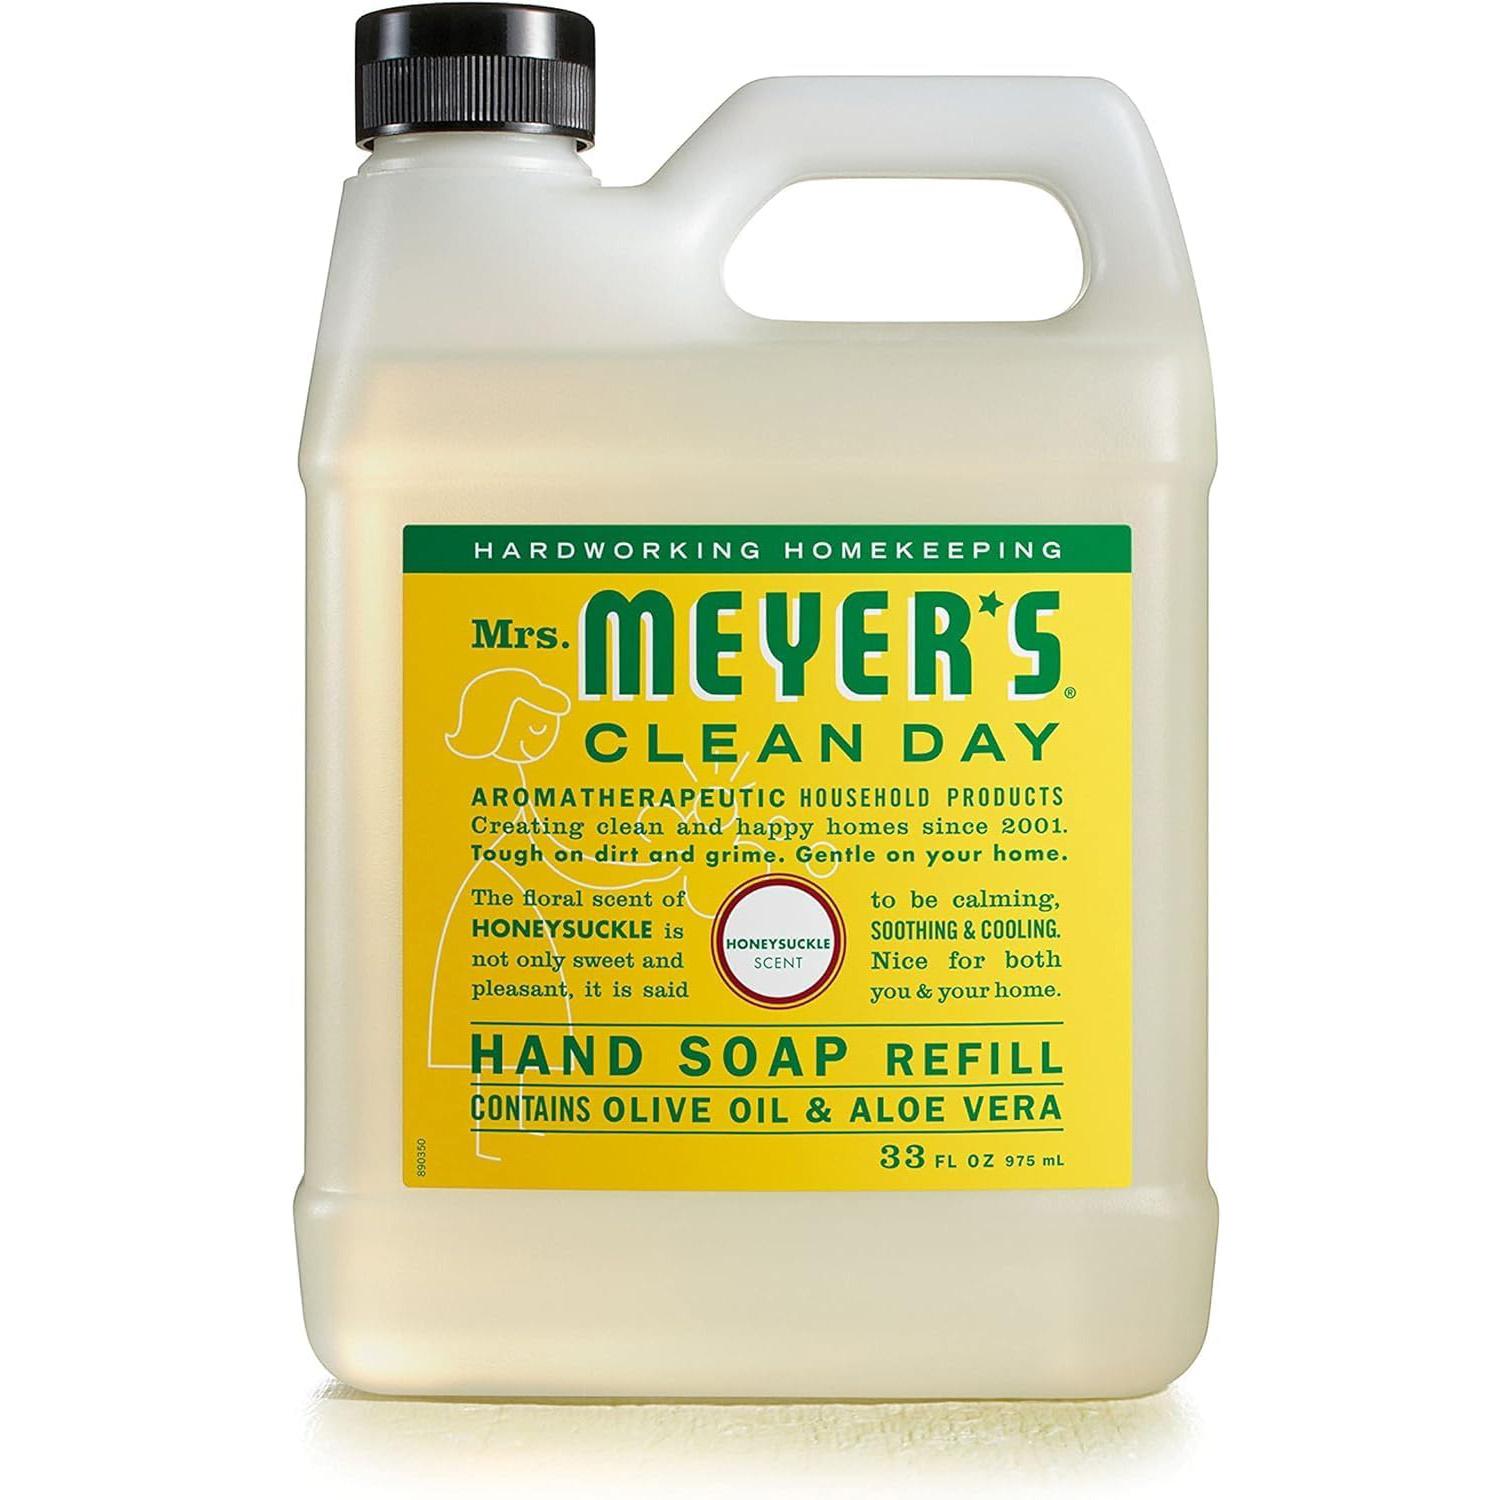 Mrs Meyers Clean Day Hand Soap Refill 33oz for $5.86